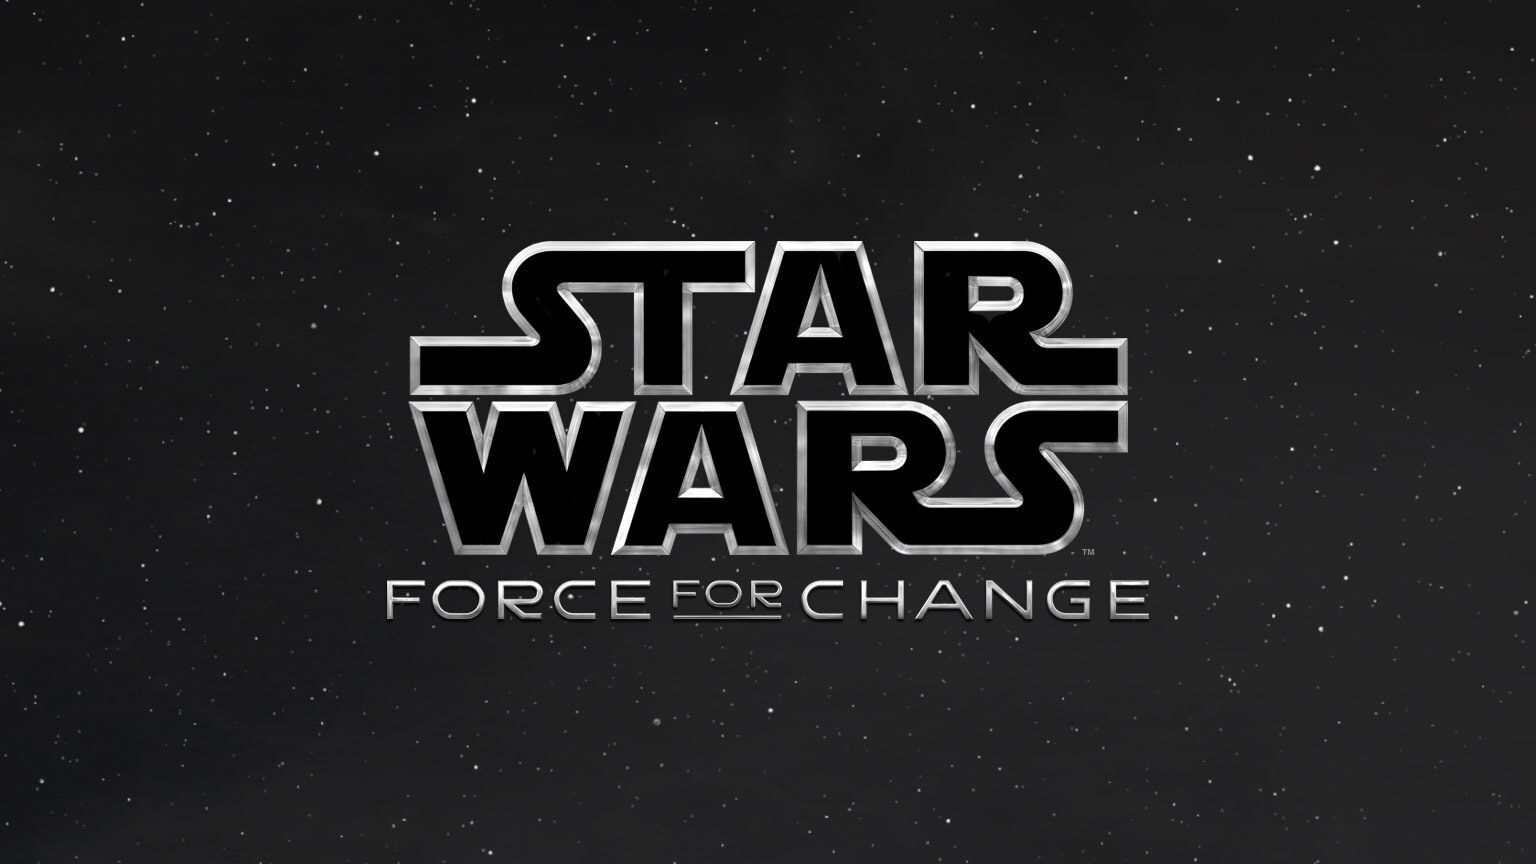 Star Wars: Force for Change Joins Forces with Unicef Kid Power